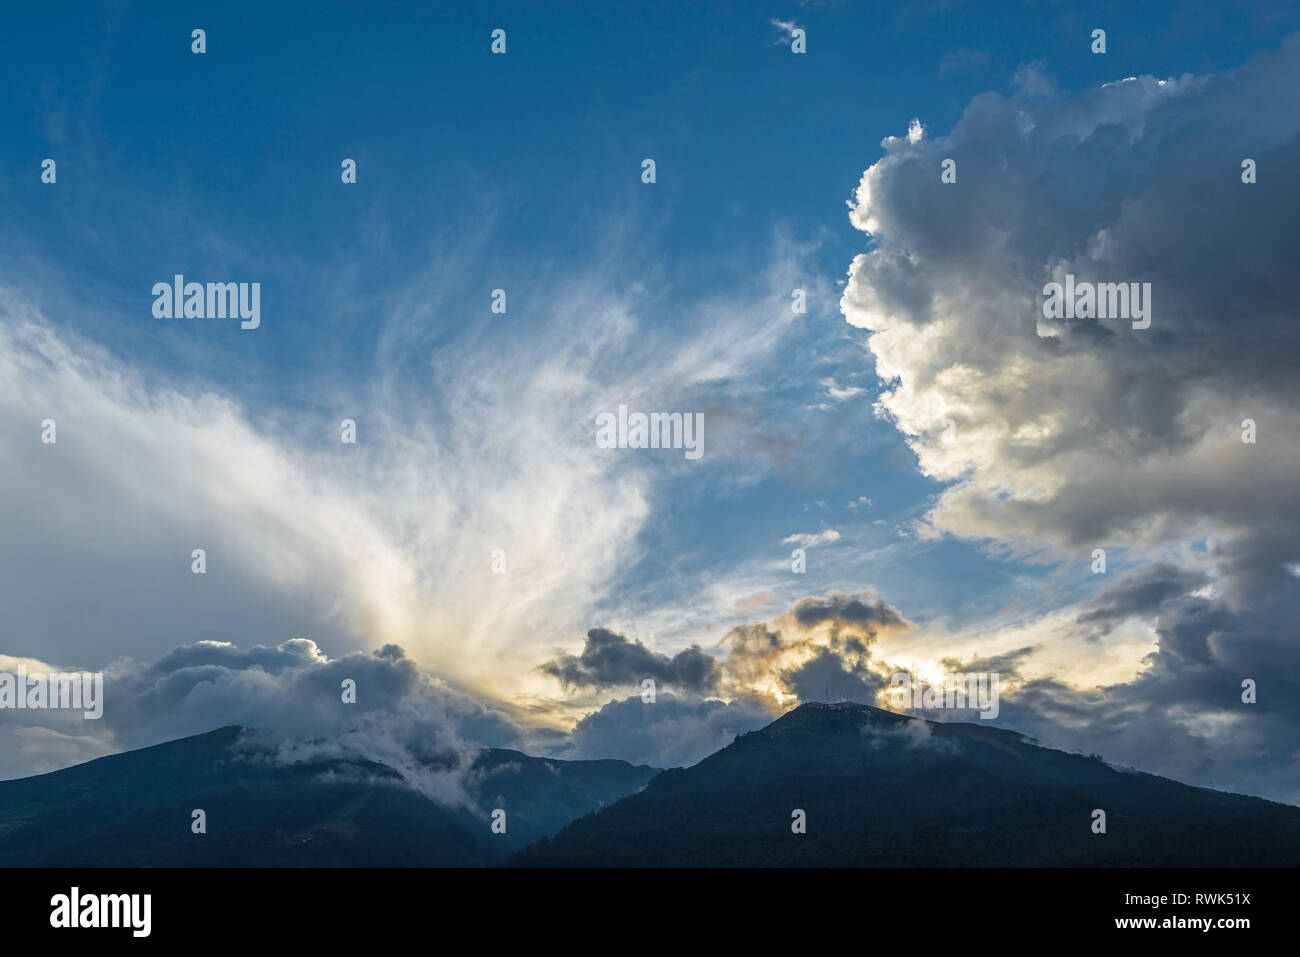 Cloudscape with the peaks of the Pichincha volcano at sunset seen from the city of Quito in the Andes mountain range, Ecuador, South America. Stock Photo